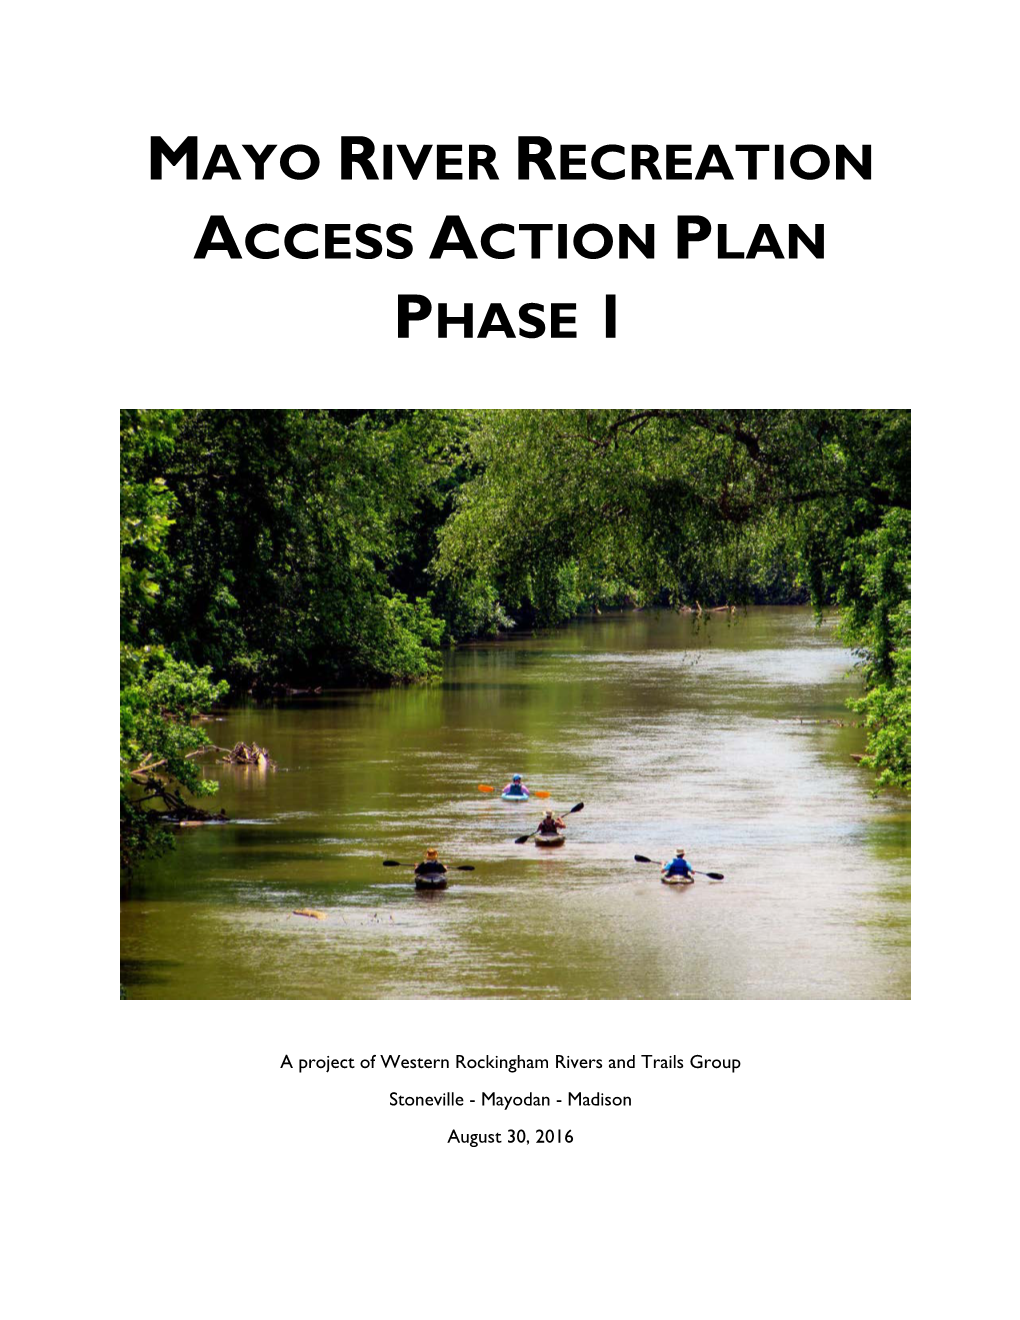 Mayo River Recreation Access Action Plan Phase 1